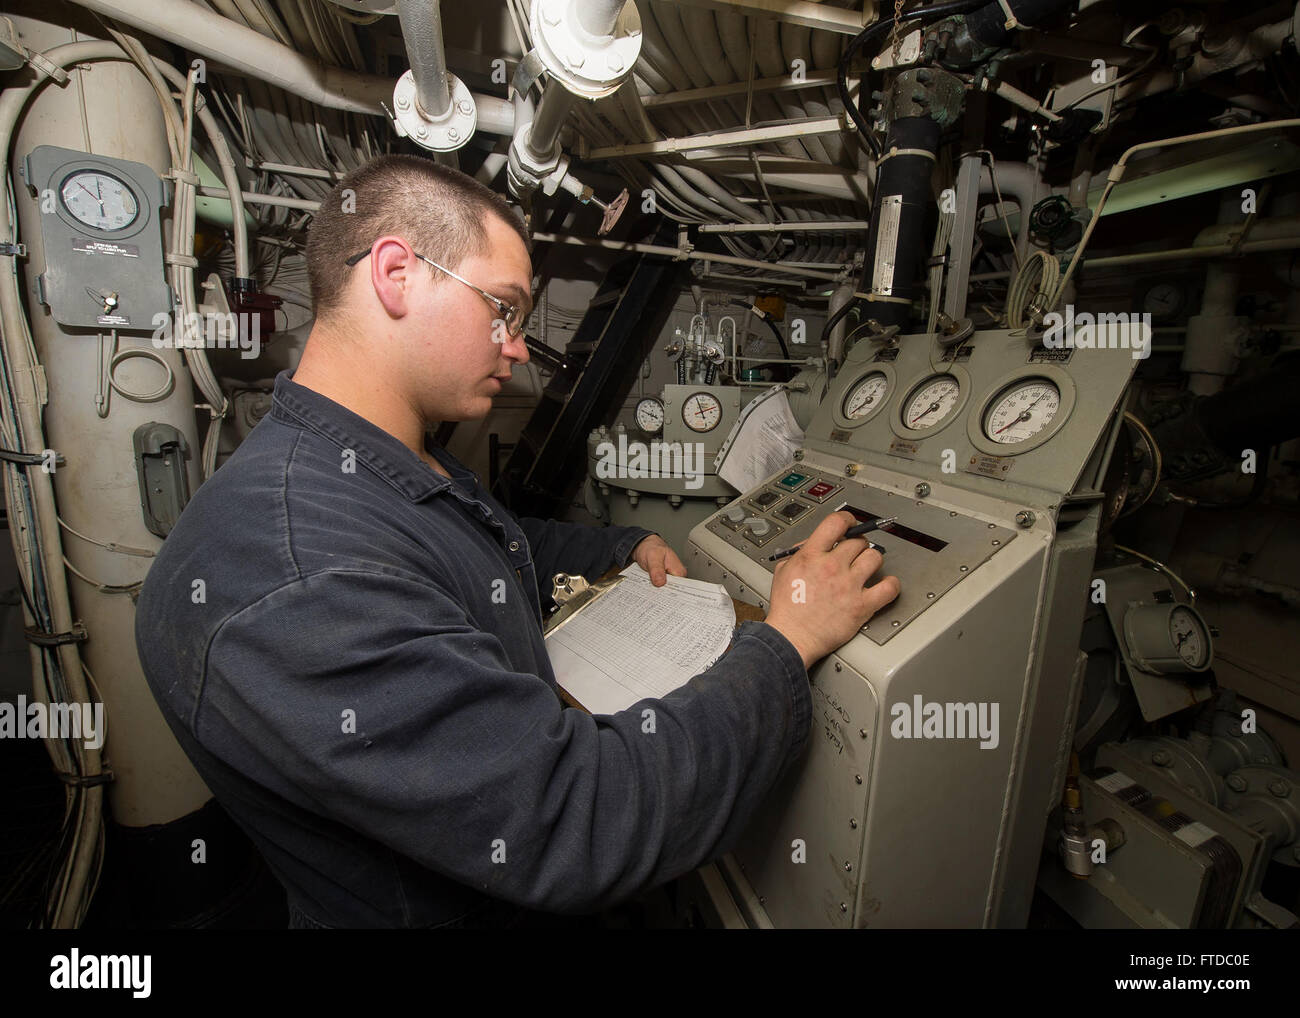 150424-N-FQ994-056 LARNACA, Cyprus (April 24, 2015) Gas Turbine Systems Technician (Mechanical) Fireman Lonnie Atkins, from Greenfield, Ohio, takes temperature and pressure readings from the 2LPAC (low pressure air compressor) aboard USS Ross (DDG 71) April 24, 2015.  Ross, an Arleigh Burke-class guided-missile destroyer, forward-deployed to Rota, Spain, is conducting naval operations in the U.S. 6th Fleet area of operations in support of U.S. national security interests in Europe.  (U.S. Navy photo by Mass Communication Specialist 3rd Class Robert S. Price/Released) Stock Photo